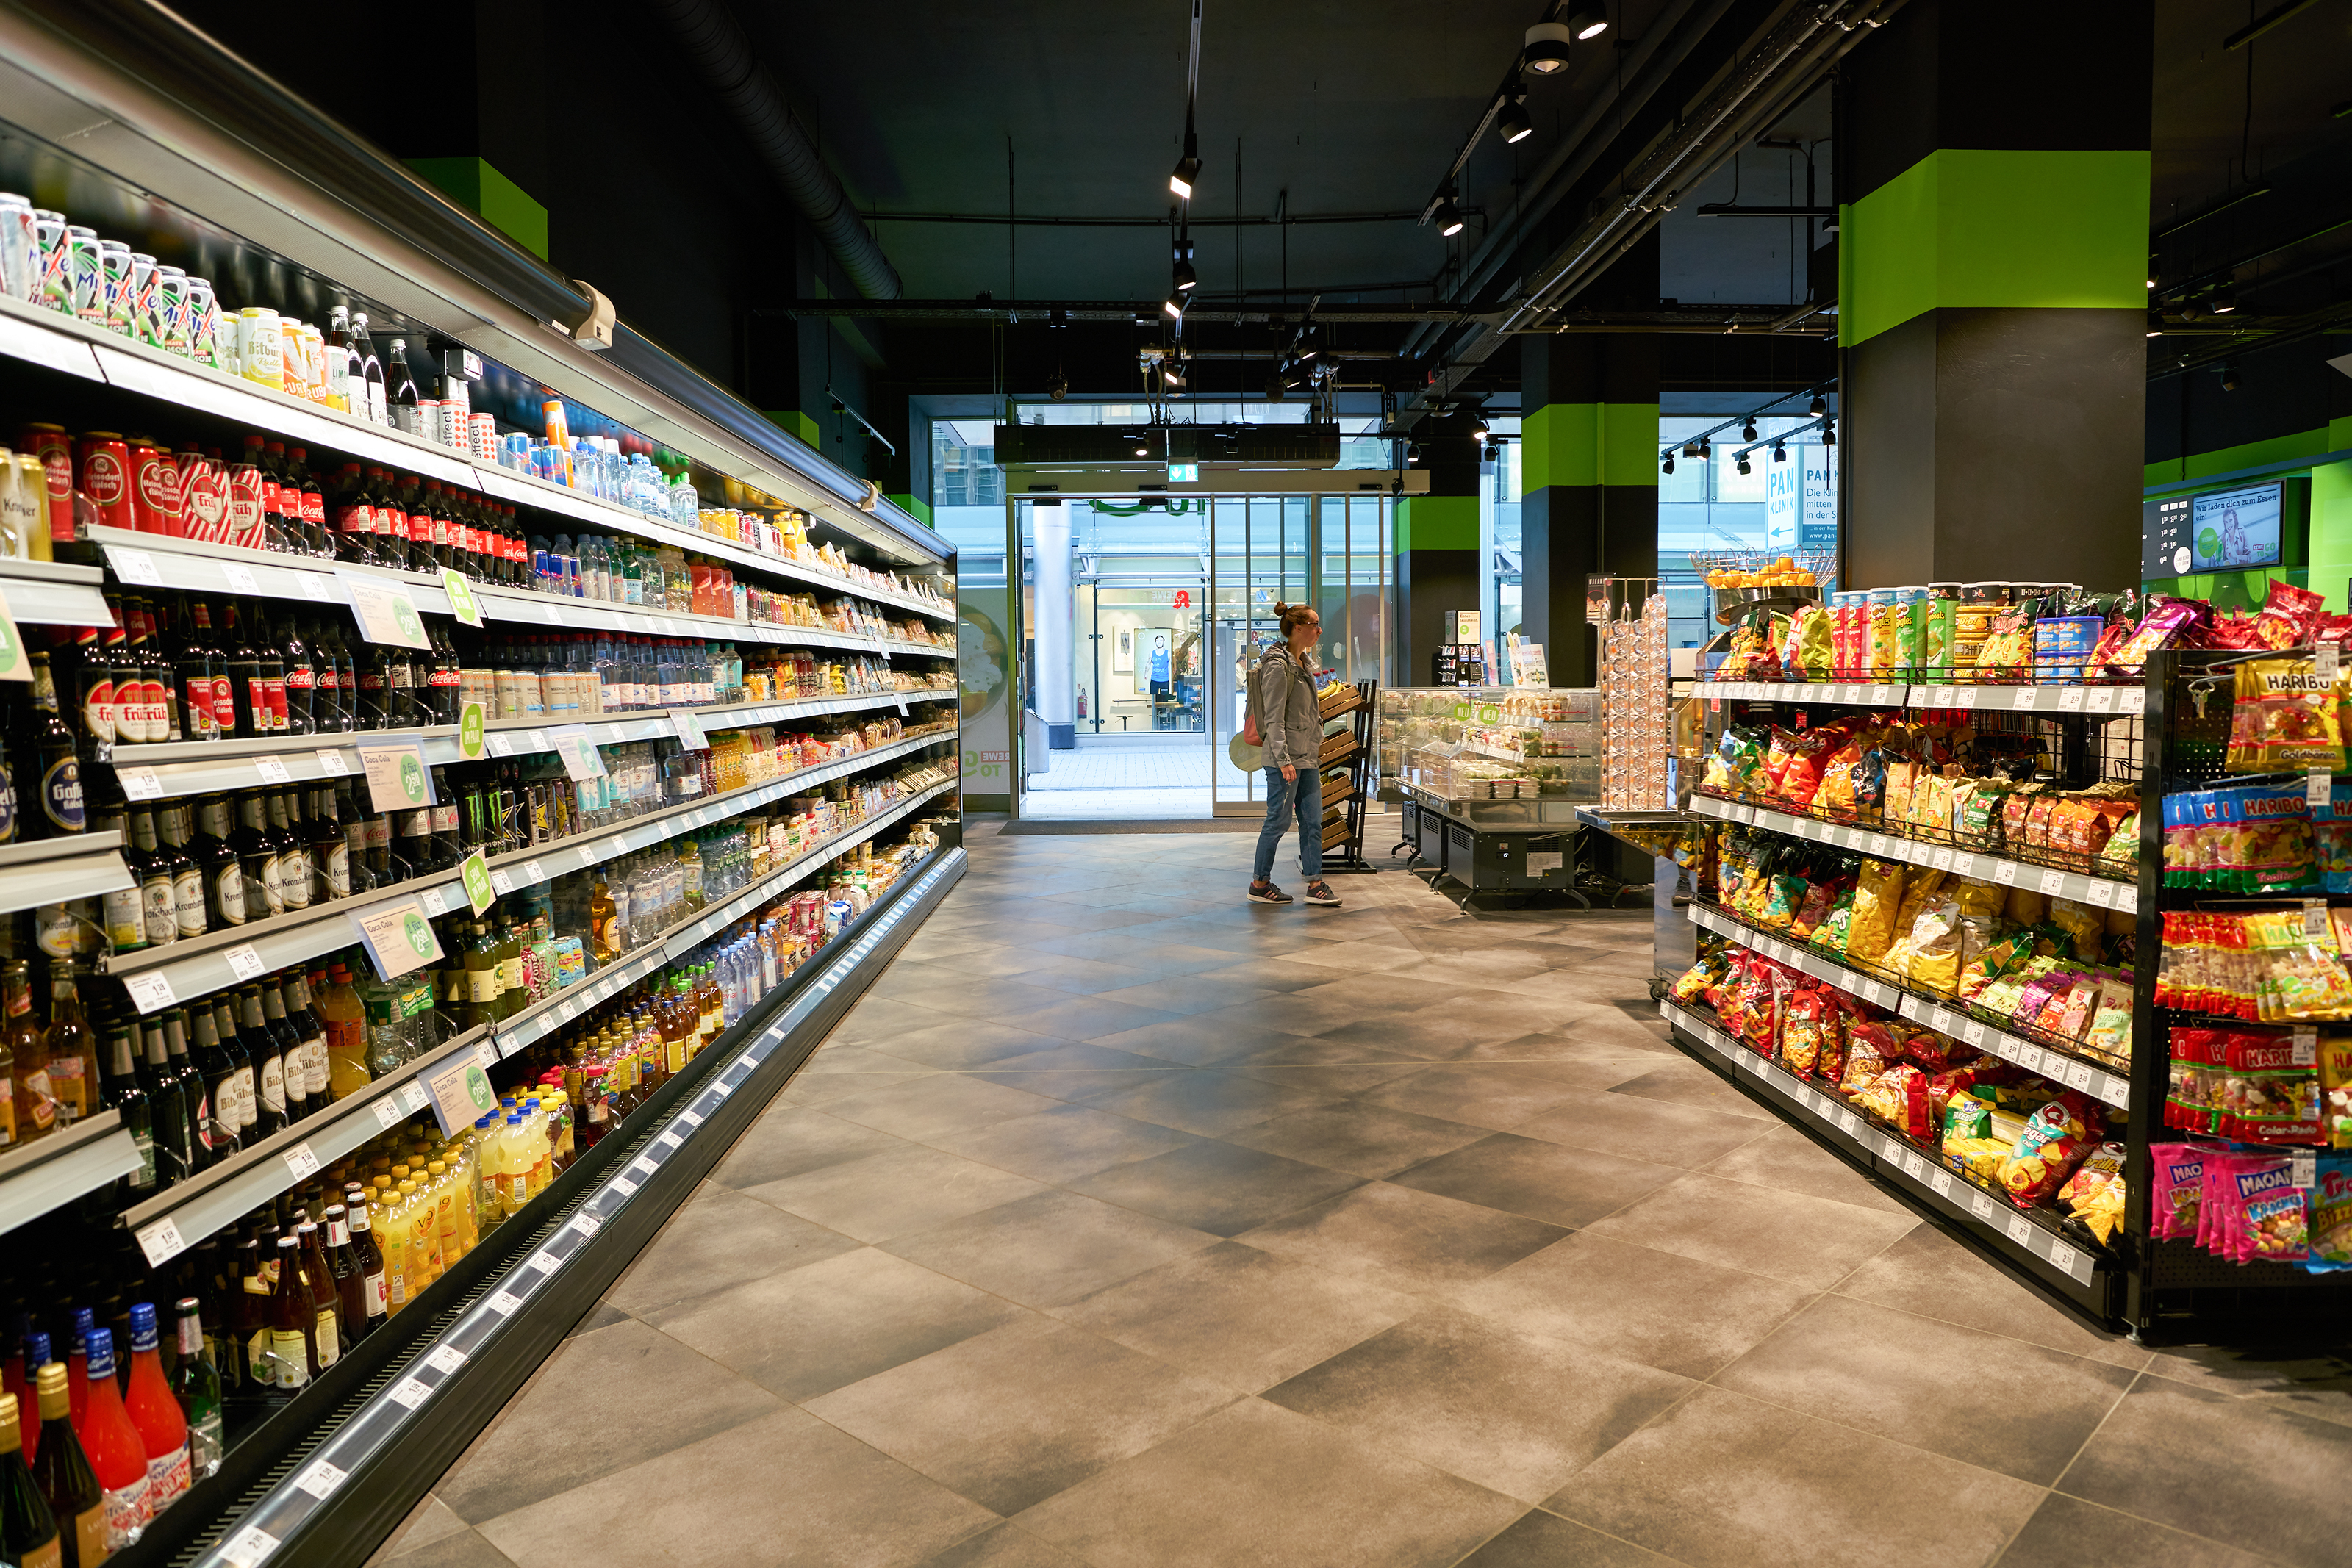 Grocery store aisle. | Source: Shutterstock